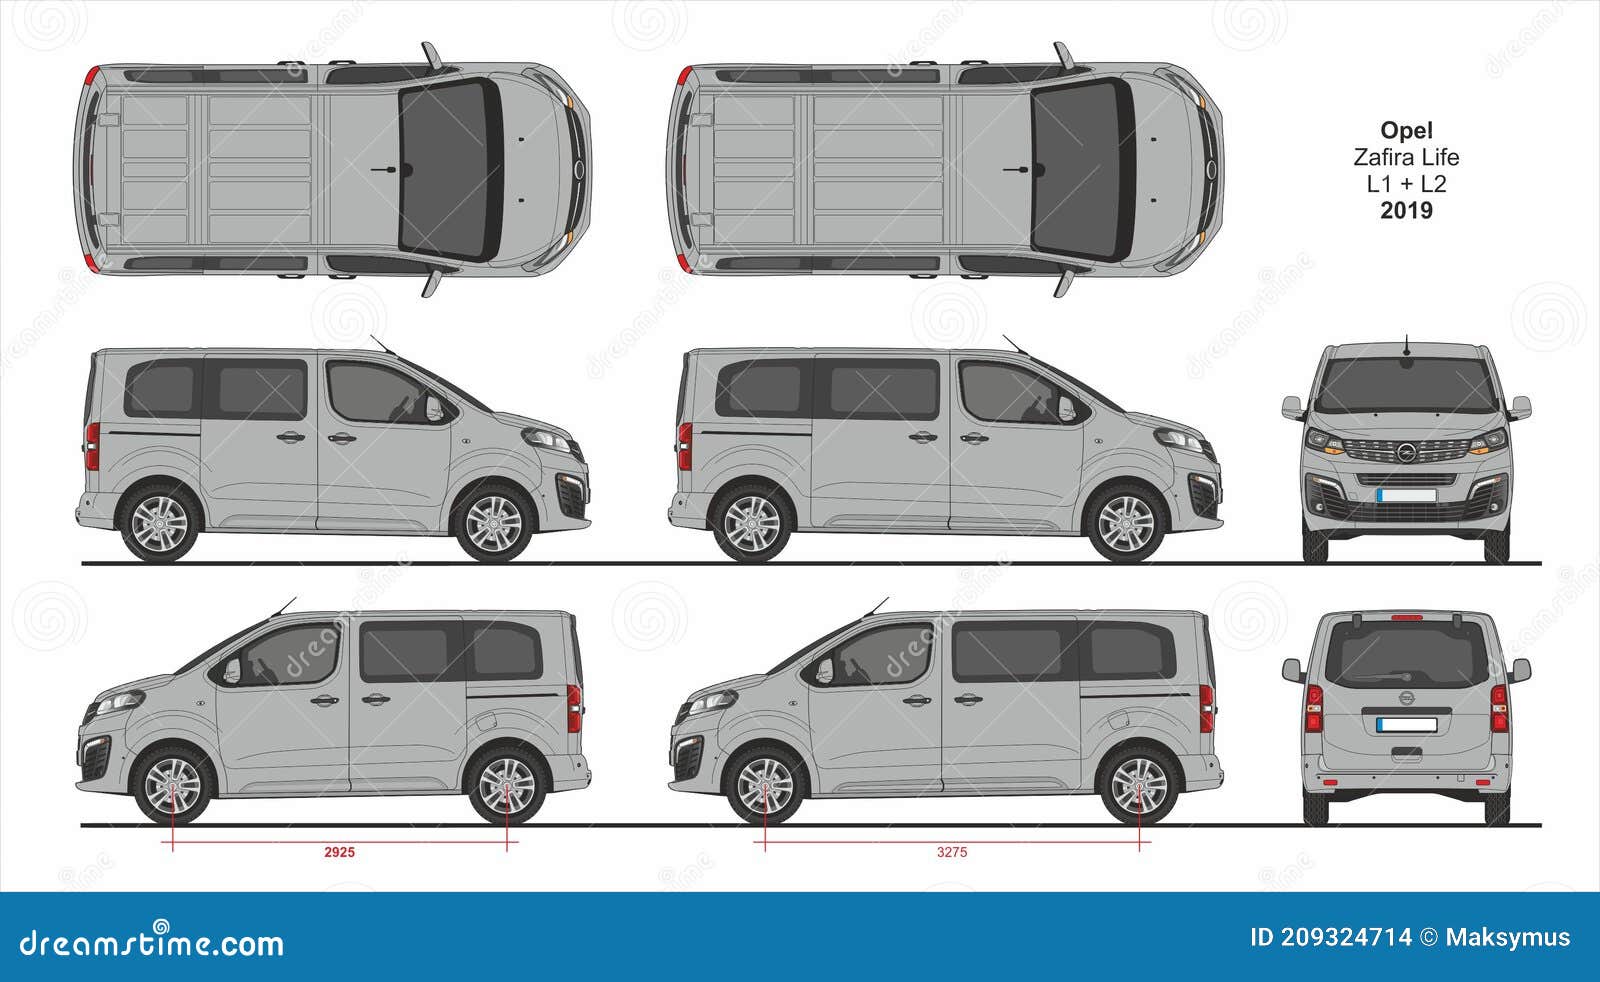 https://thumbs.dreamstime.com/z/opel-zafira-life-passenger-van-l-detailed-template-design-production-vehicle-wraps-scale-to-209324714.jpg